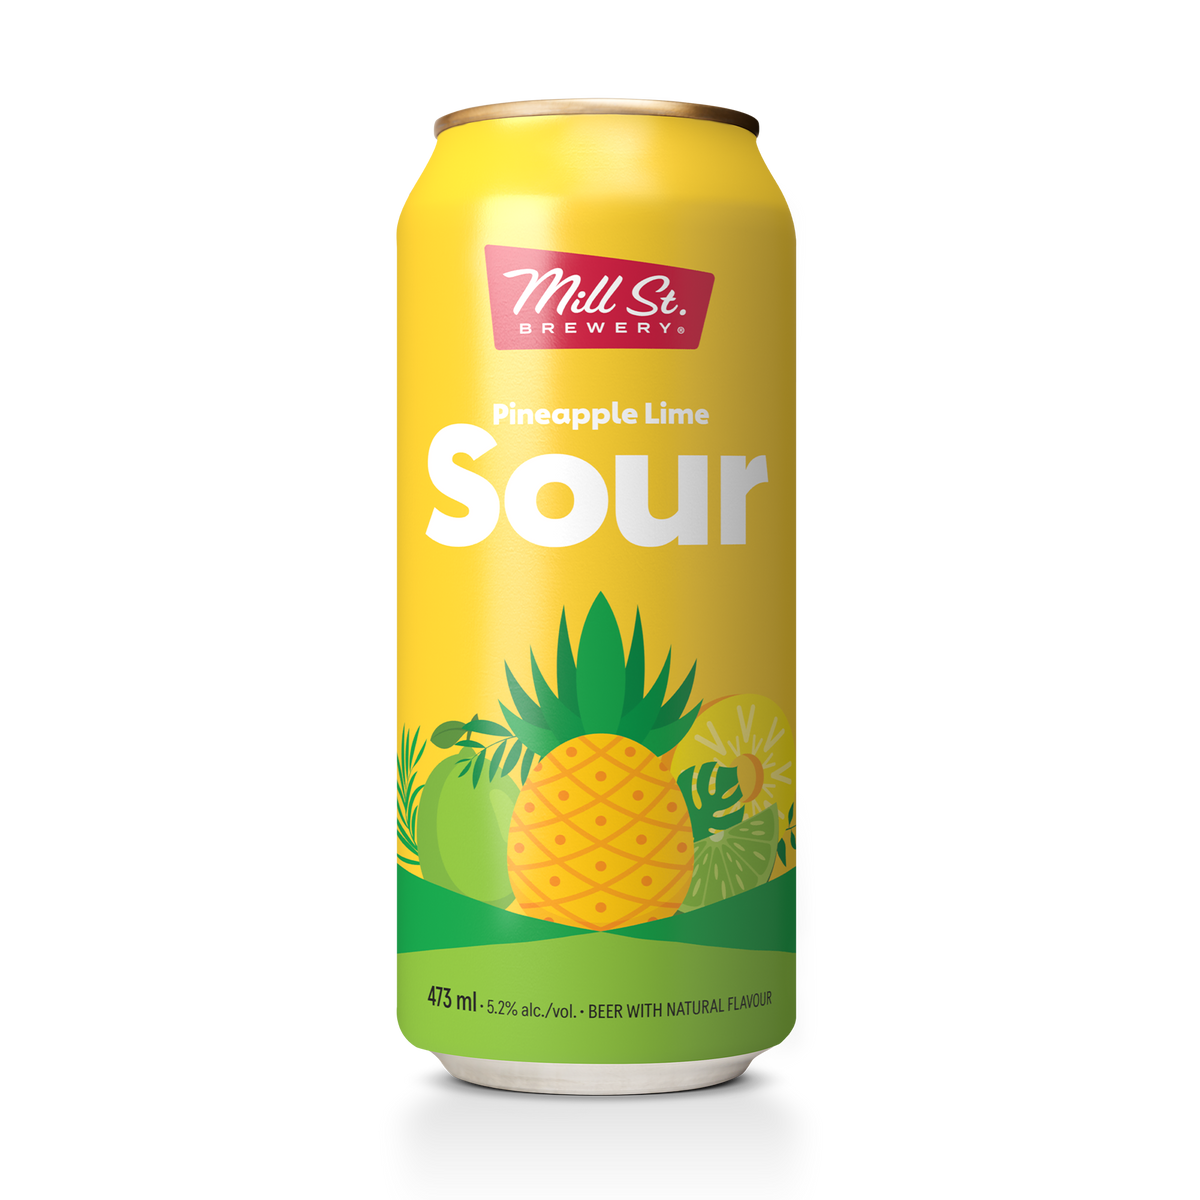 Pineapple Lime Sour